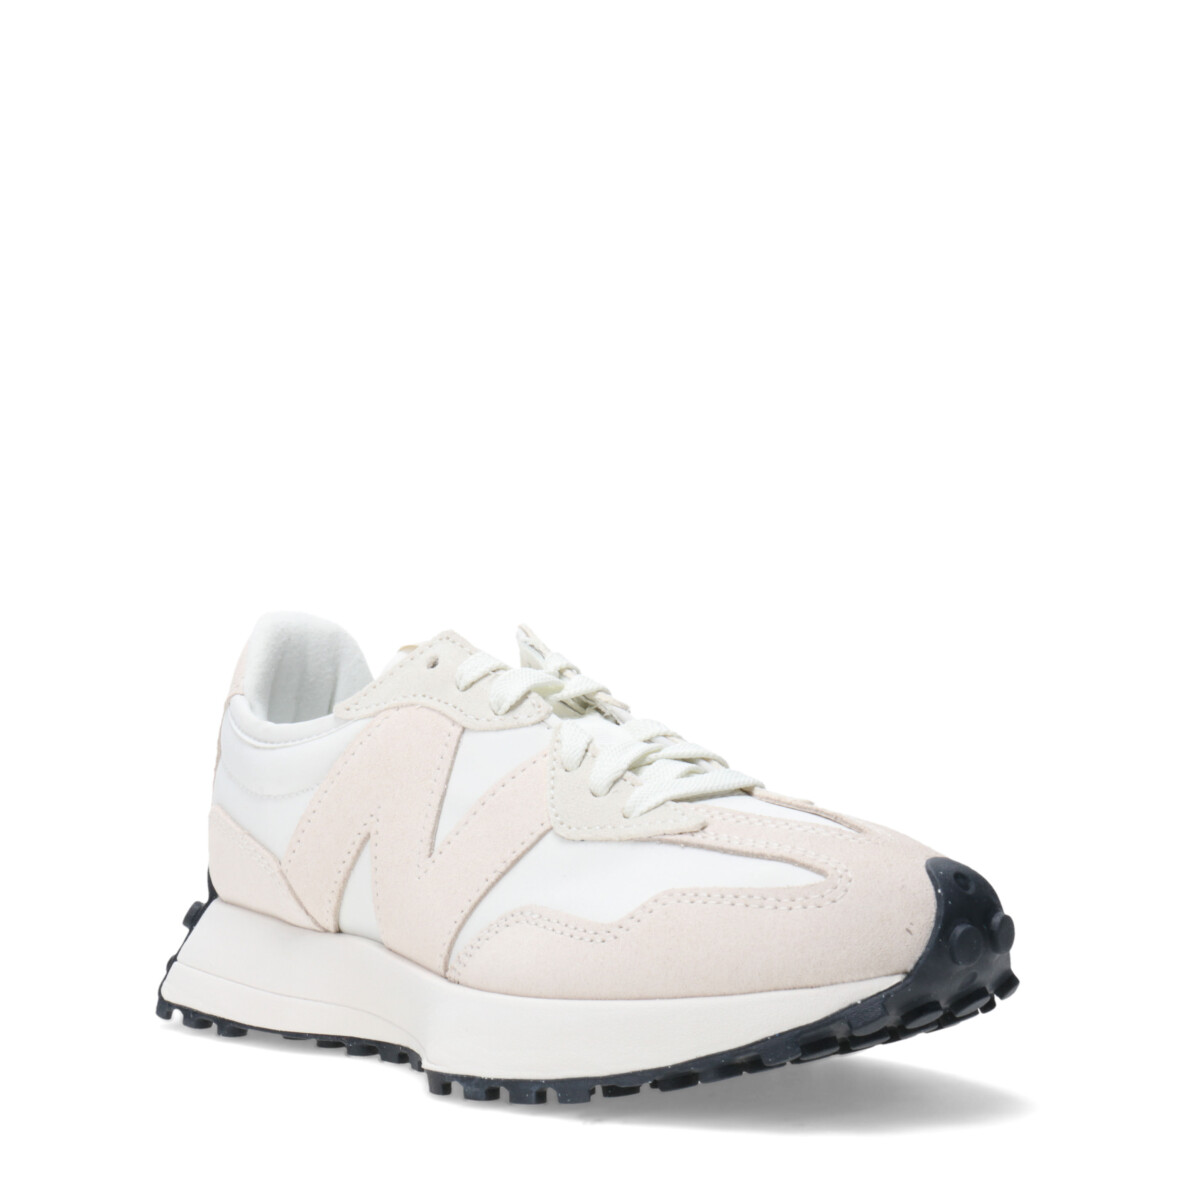 Life Style New Balance - Natural/Beige 